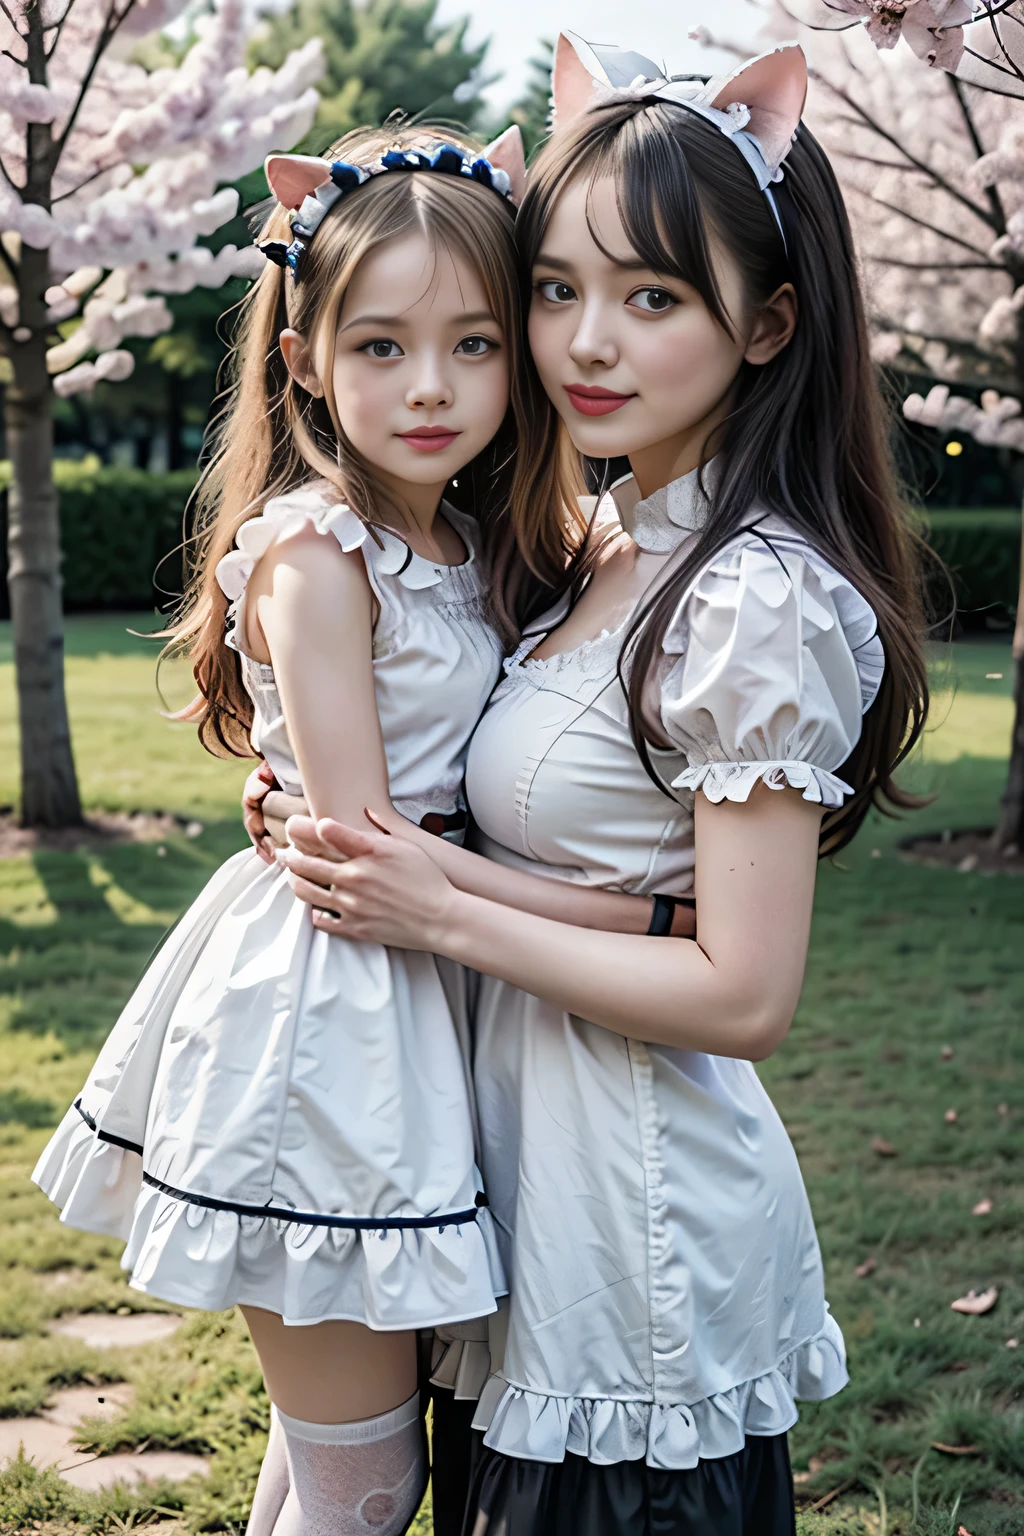 A 20-year-old female maid and a 6-year-old girl, 20-year-old woman wearing traditional maid uniform, The 6-year-old girl is wearing a light blue dress., 6 year old girl wearing ribbon headband, 20 year old woman has big breasts, Beautifully detailed face, A 20-year-old woman has a bun hairstyle, Natural sunlight, A 20-year-old woman is wearing glasses, They are standing under a cherry tree, Professional family photos, 6 year old girl laughing, The two are very natural. The 20-year-old woman is 170cm tall., Anatomically correct body, A 6-year-old girl is 100cm tall, 20 year old woman has purple hair, 20 year old woman hugging, Red lipstick, A 20-year-old woman is wearing a black skirt with frills, Chic pumps, 6-year-old girl has twin tails, 20 year old woman in garter belt and white stockings, They are both smiling., A 20-year-old woman is holding a 6-year-old girl in her arms, 20 year old woman has skirt lift, Draw two faces in detail, The 6-year-old girl is wearing a long skirt, The 6-year-old girl has a very young face., Anatomically correct number of hands, The 6-year-old girl has blonde hair., A 6-year-old girl rests her cheek against the chest of a 20-year-old woman., Anatomically correct leg shaping, The two of them are beneath a magnificent row of cherry blossom trees., 20 year old woman in white panties, The 20-year-old woman is wearing a cat ear headband